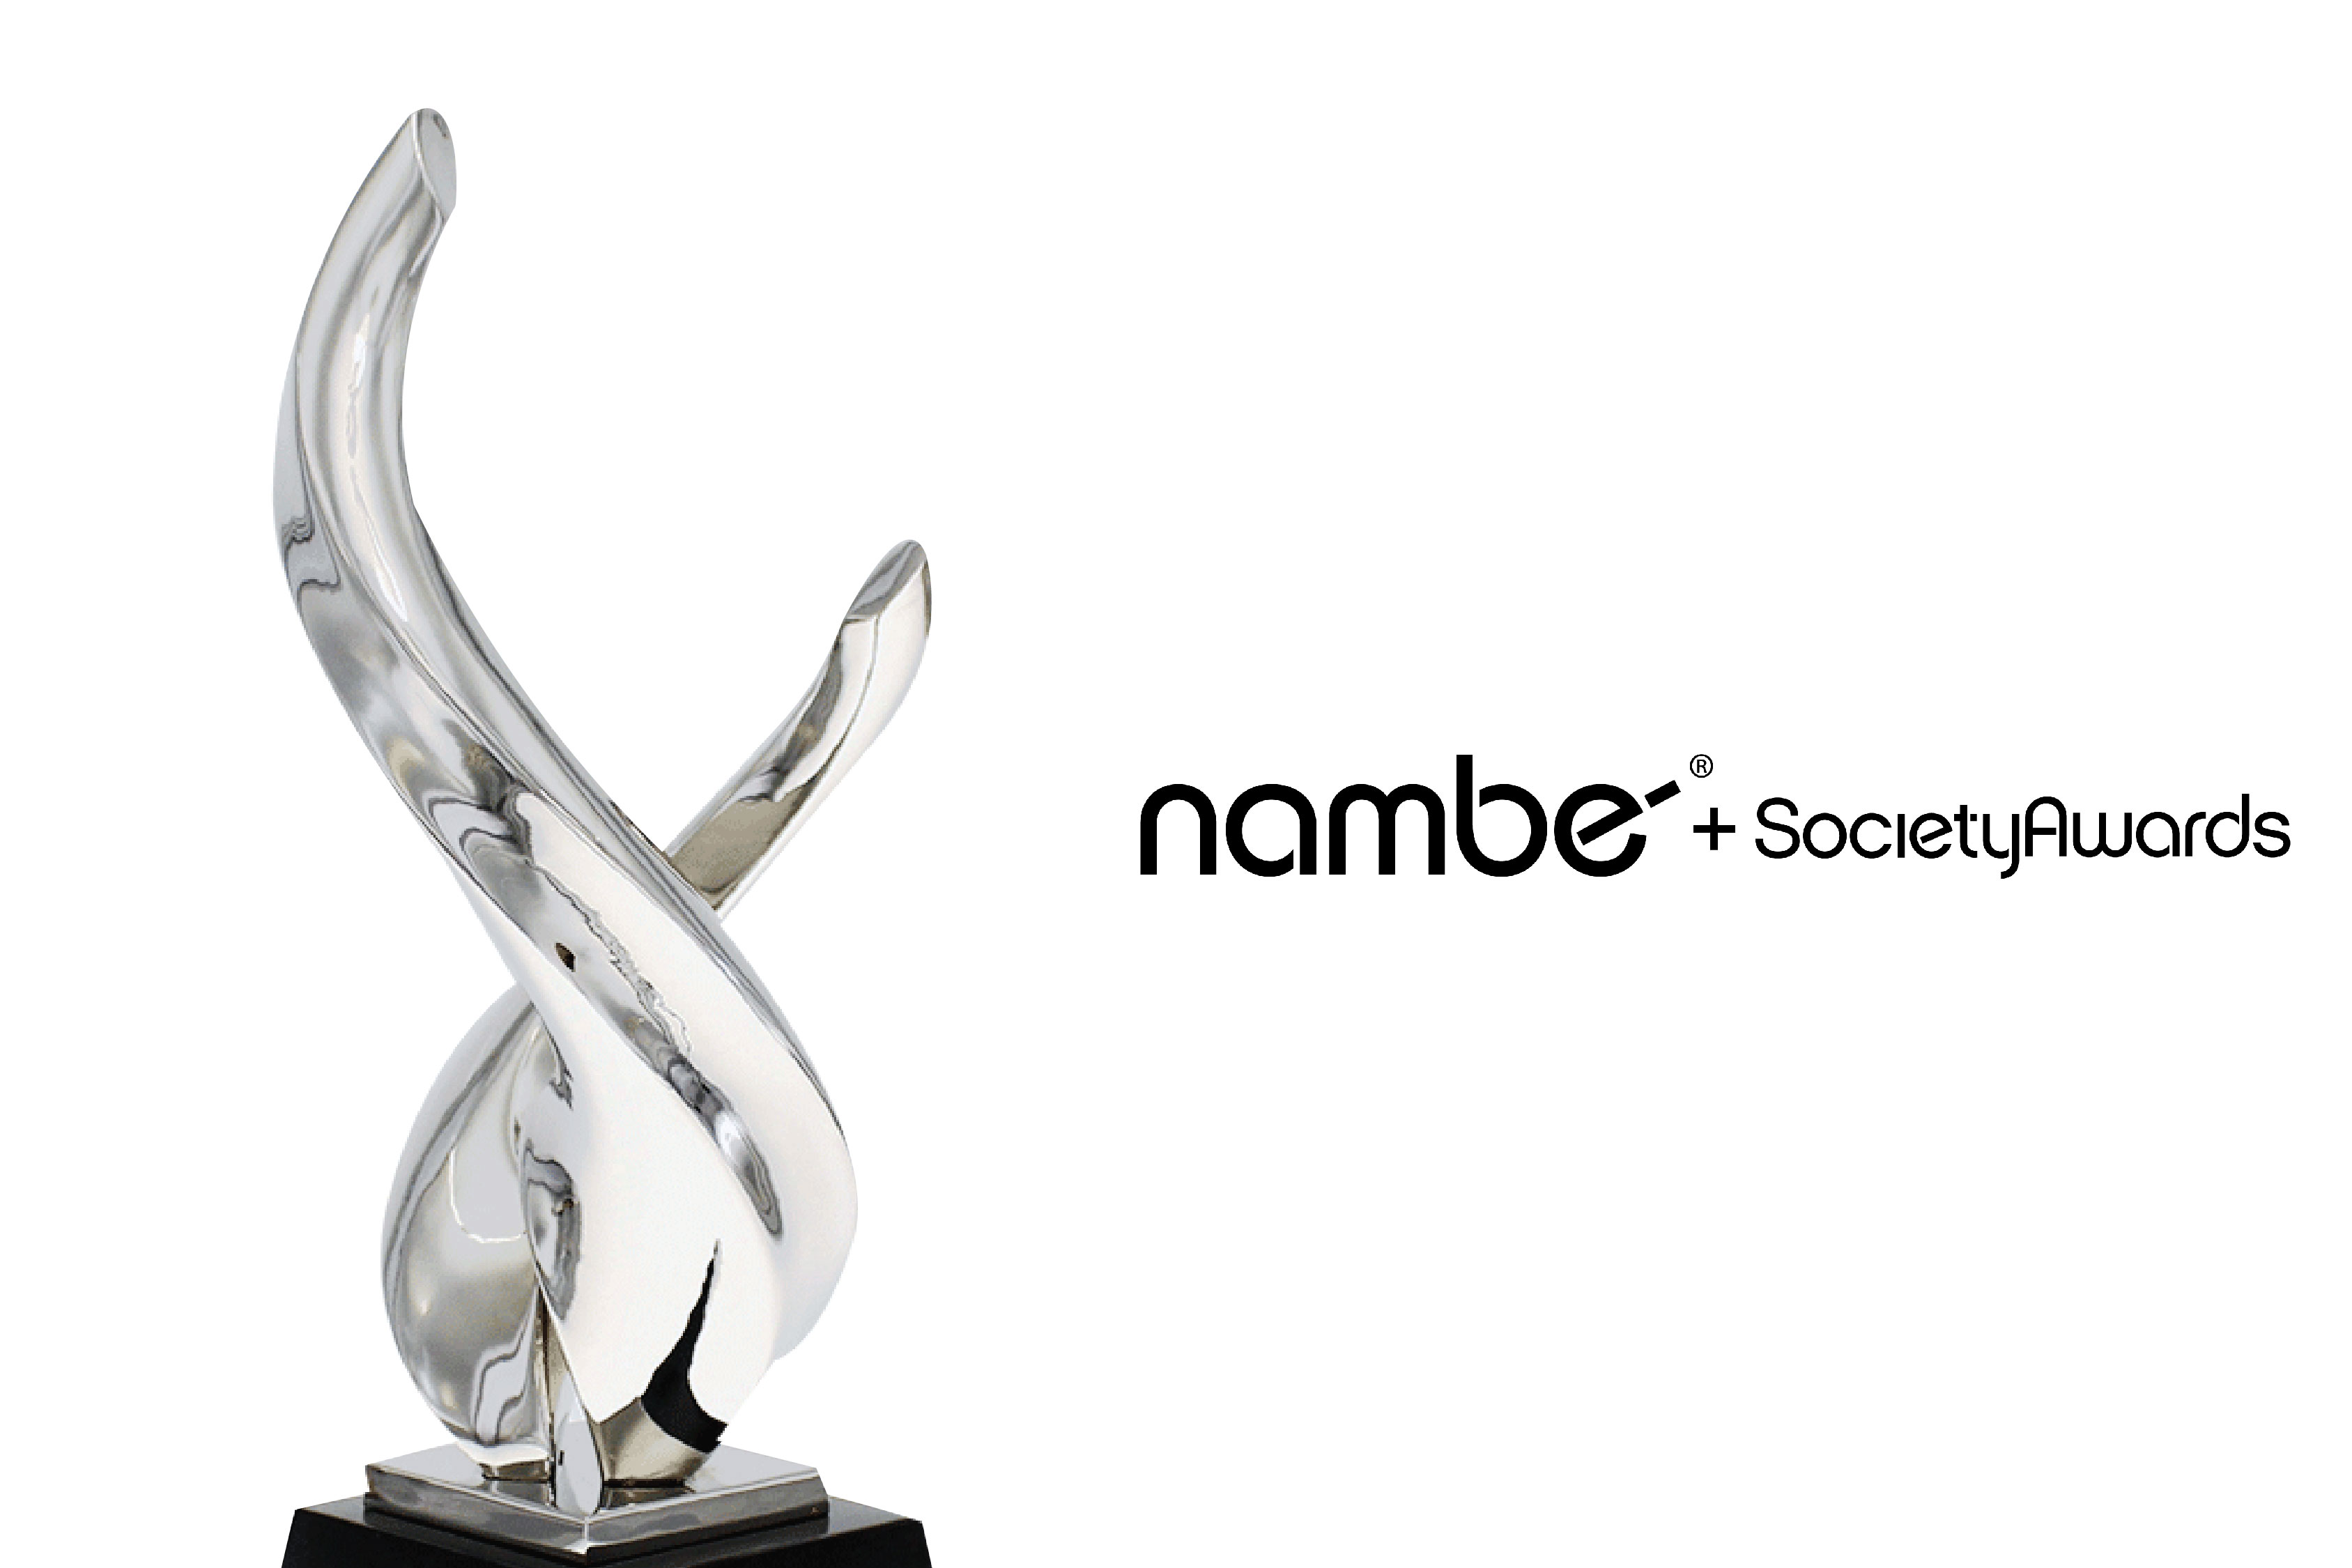 Close up view of the Namb Lark trophy and collaborative logo